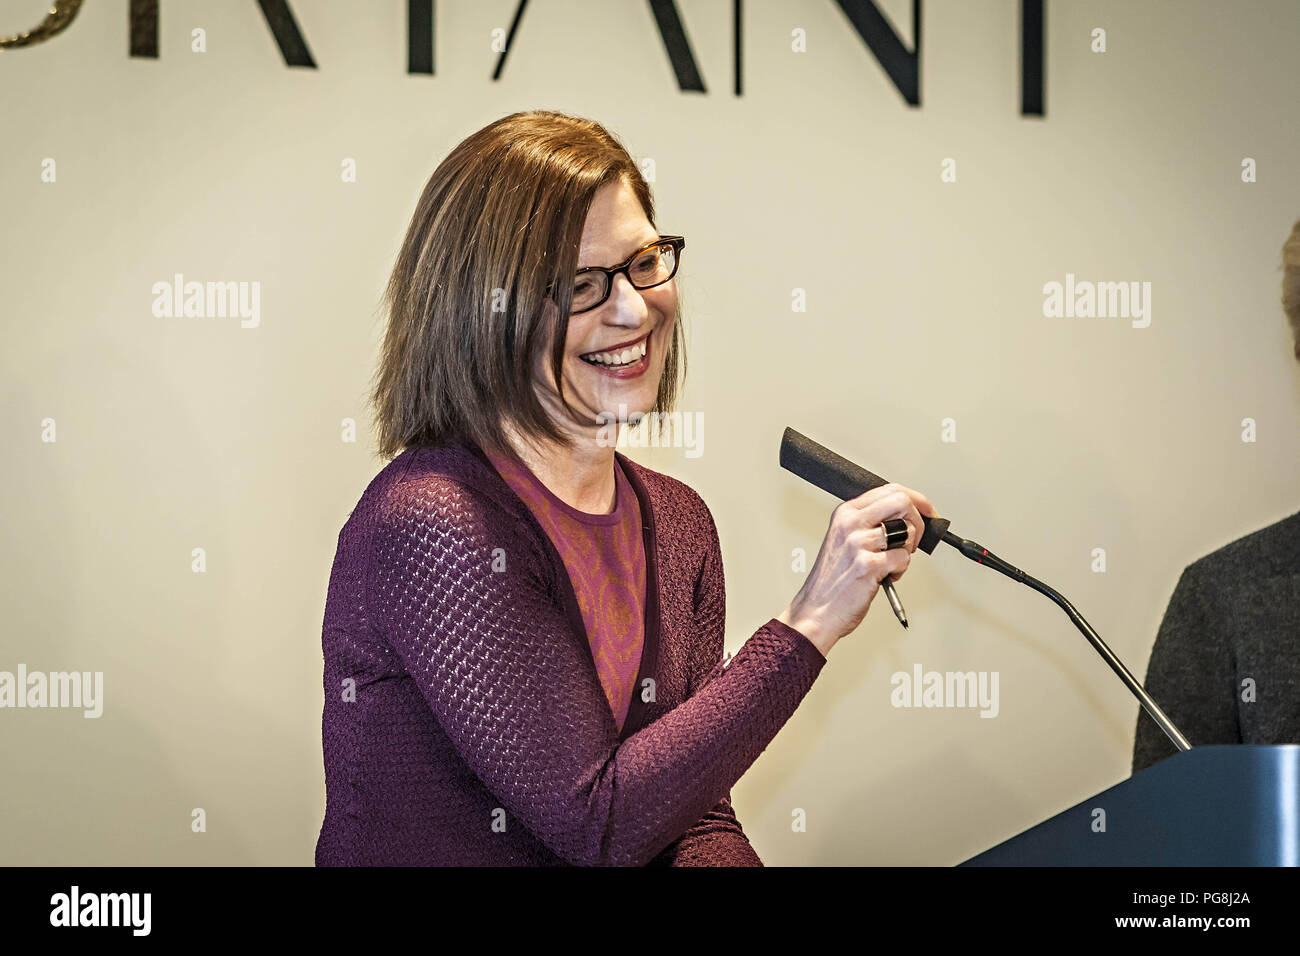 Columbus, Ohio, USA. 19th Nov, 2014. Lane Bryant CEO LINDA HEASLEY photographed during a town hall meeting & fashion Show photographed November 19, 2014 at Lane Bryant's Columbus, Ohio headquarters. Credit: James D. DeCamp/ZUMA Wire/Alamy Live News Stock Photo